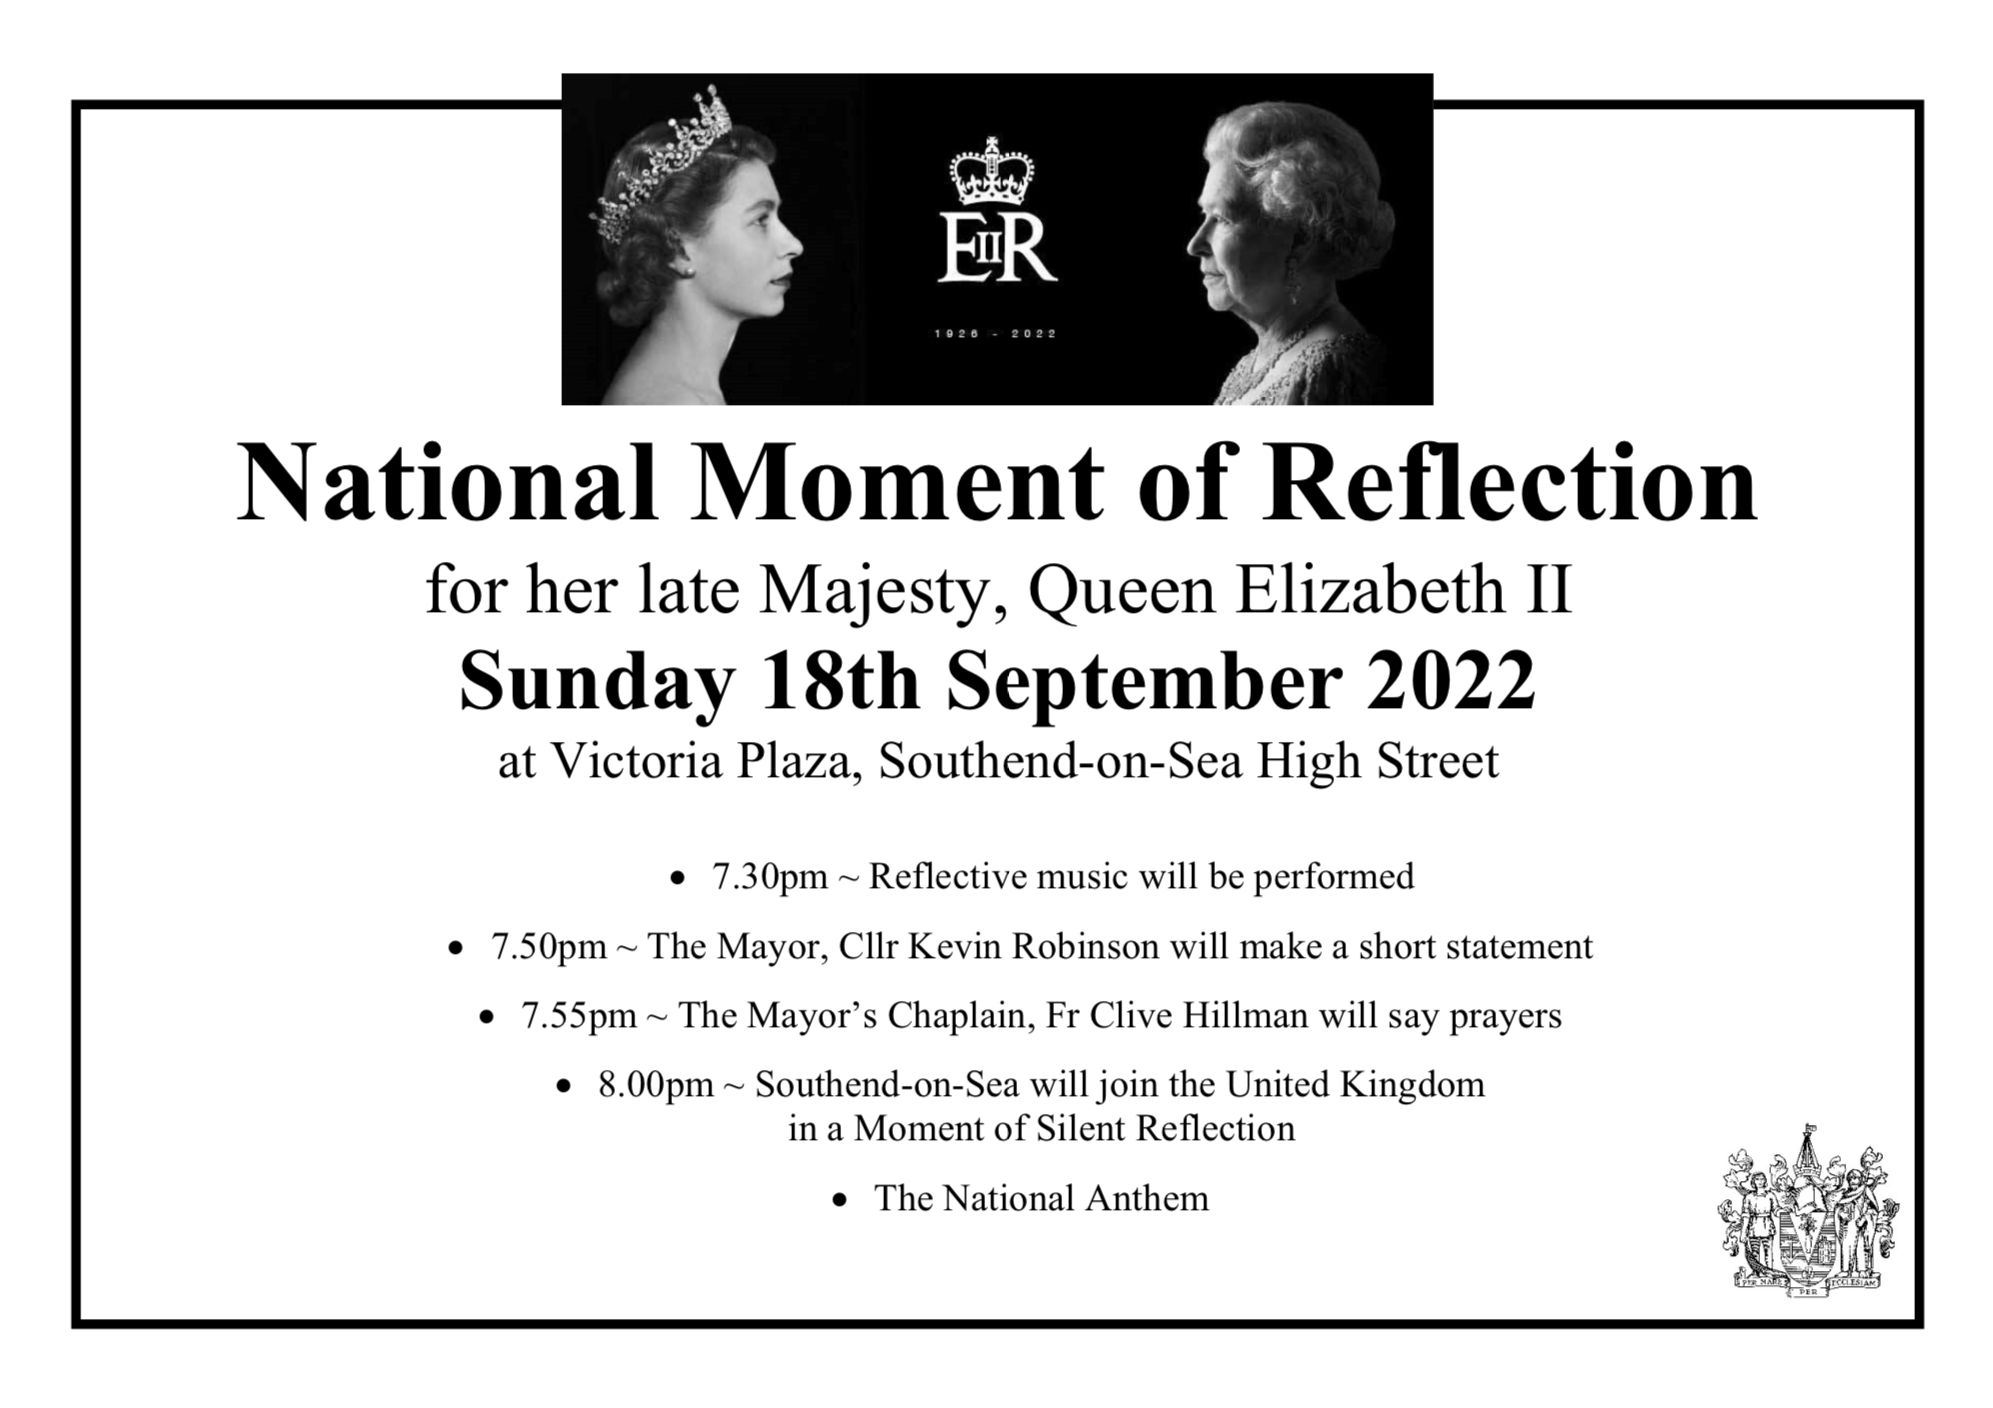 National Moment of Reflection in Southend-on-Sea for her late Majesty, Queen Elizabeth II